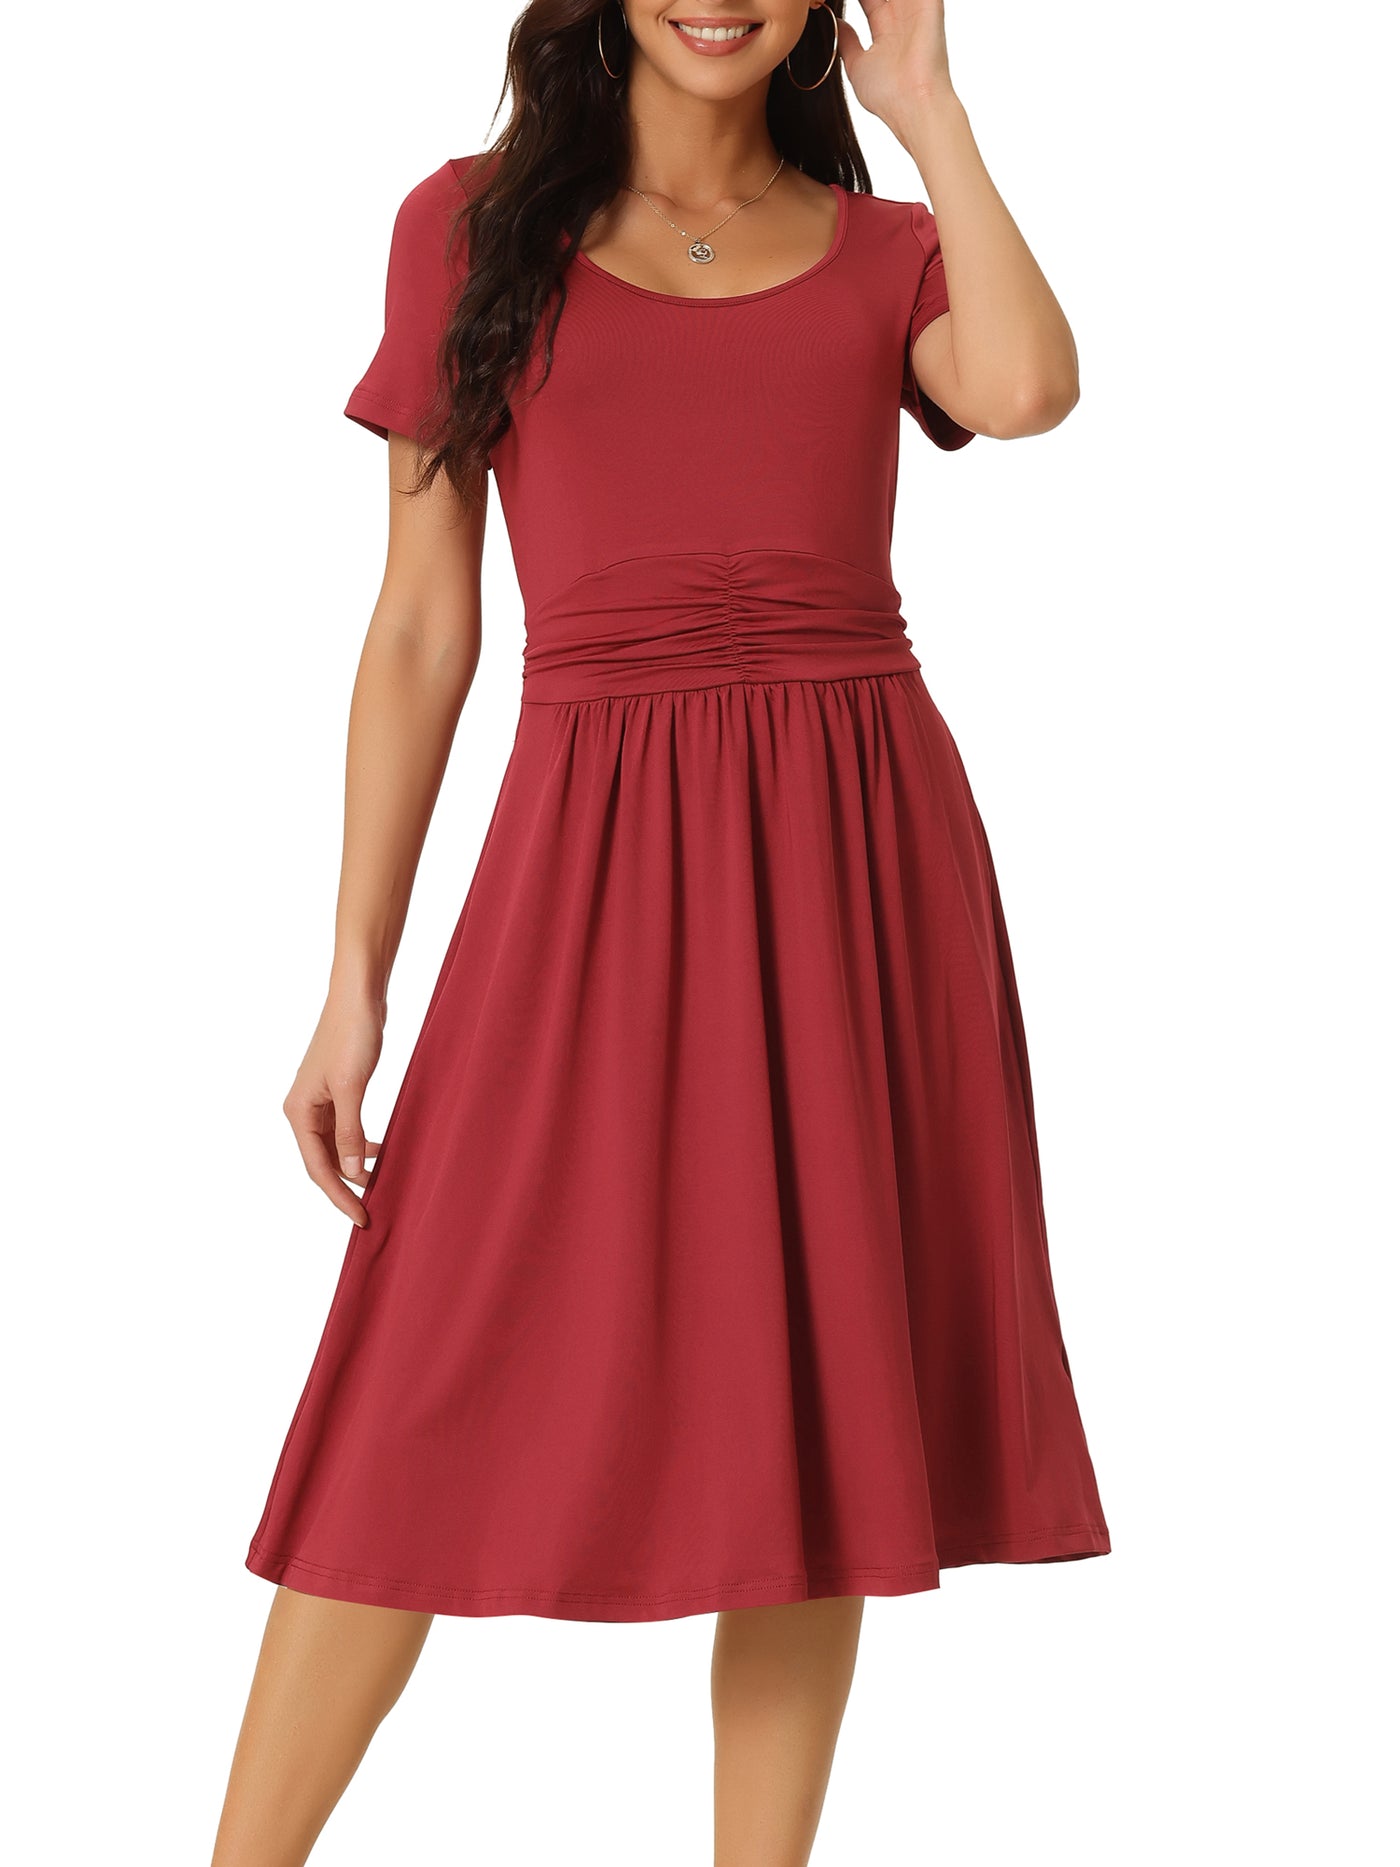 Bublédon Women's Casual Knit with Pockets Scoop Neck Short Sleeve Ruched Midi A-Line Dress